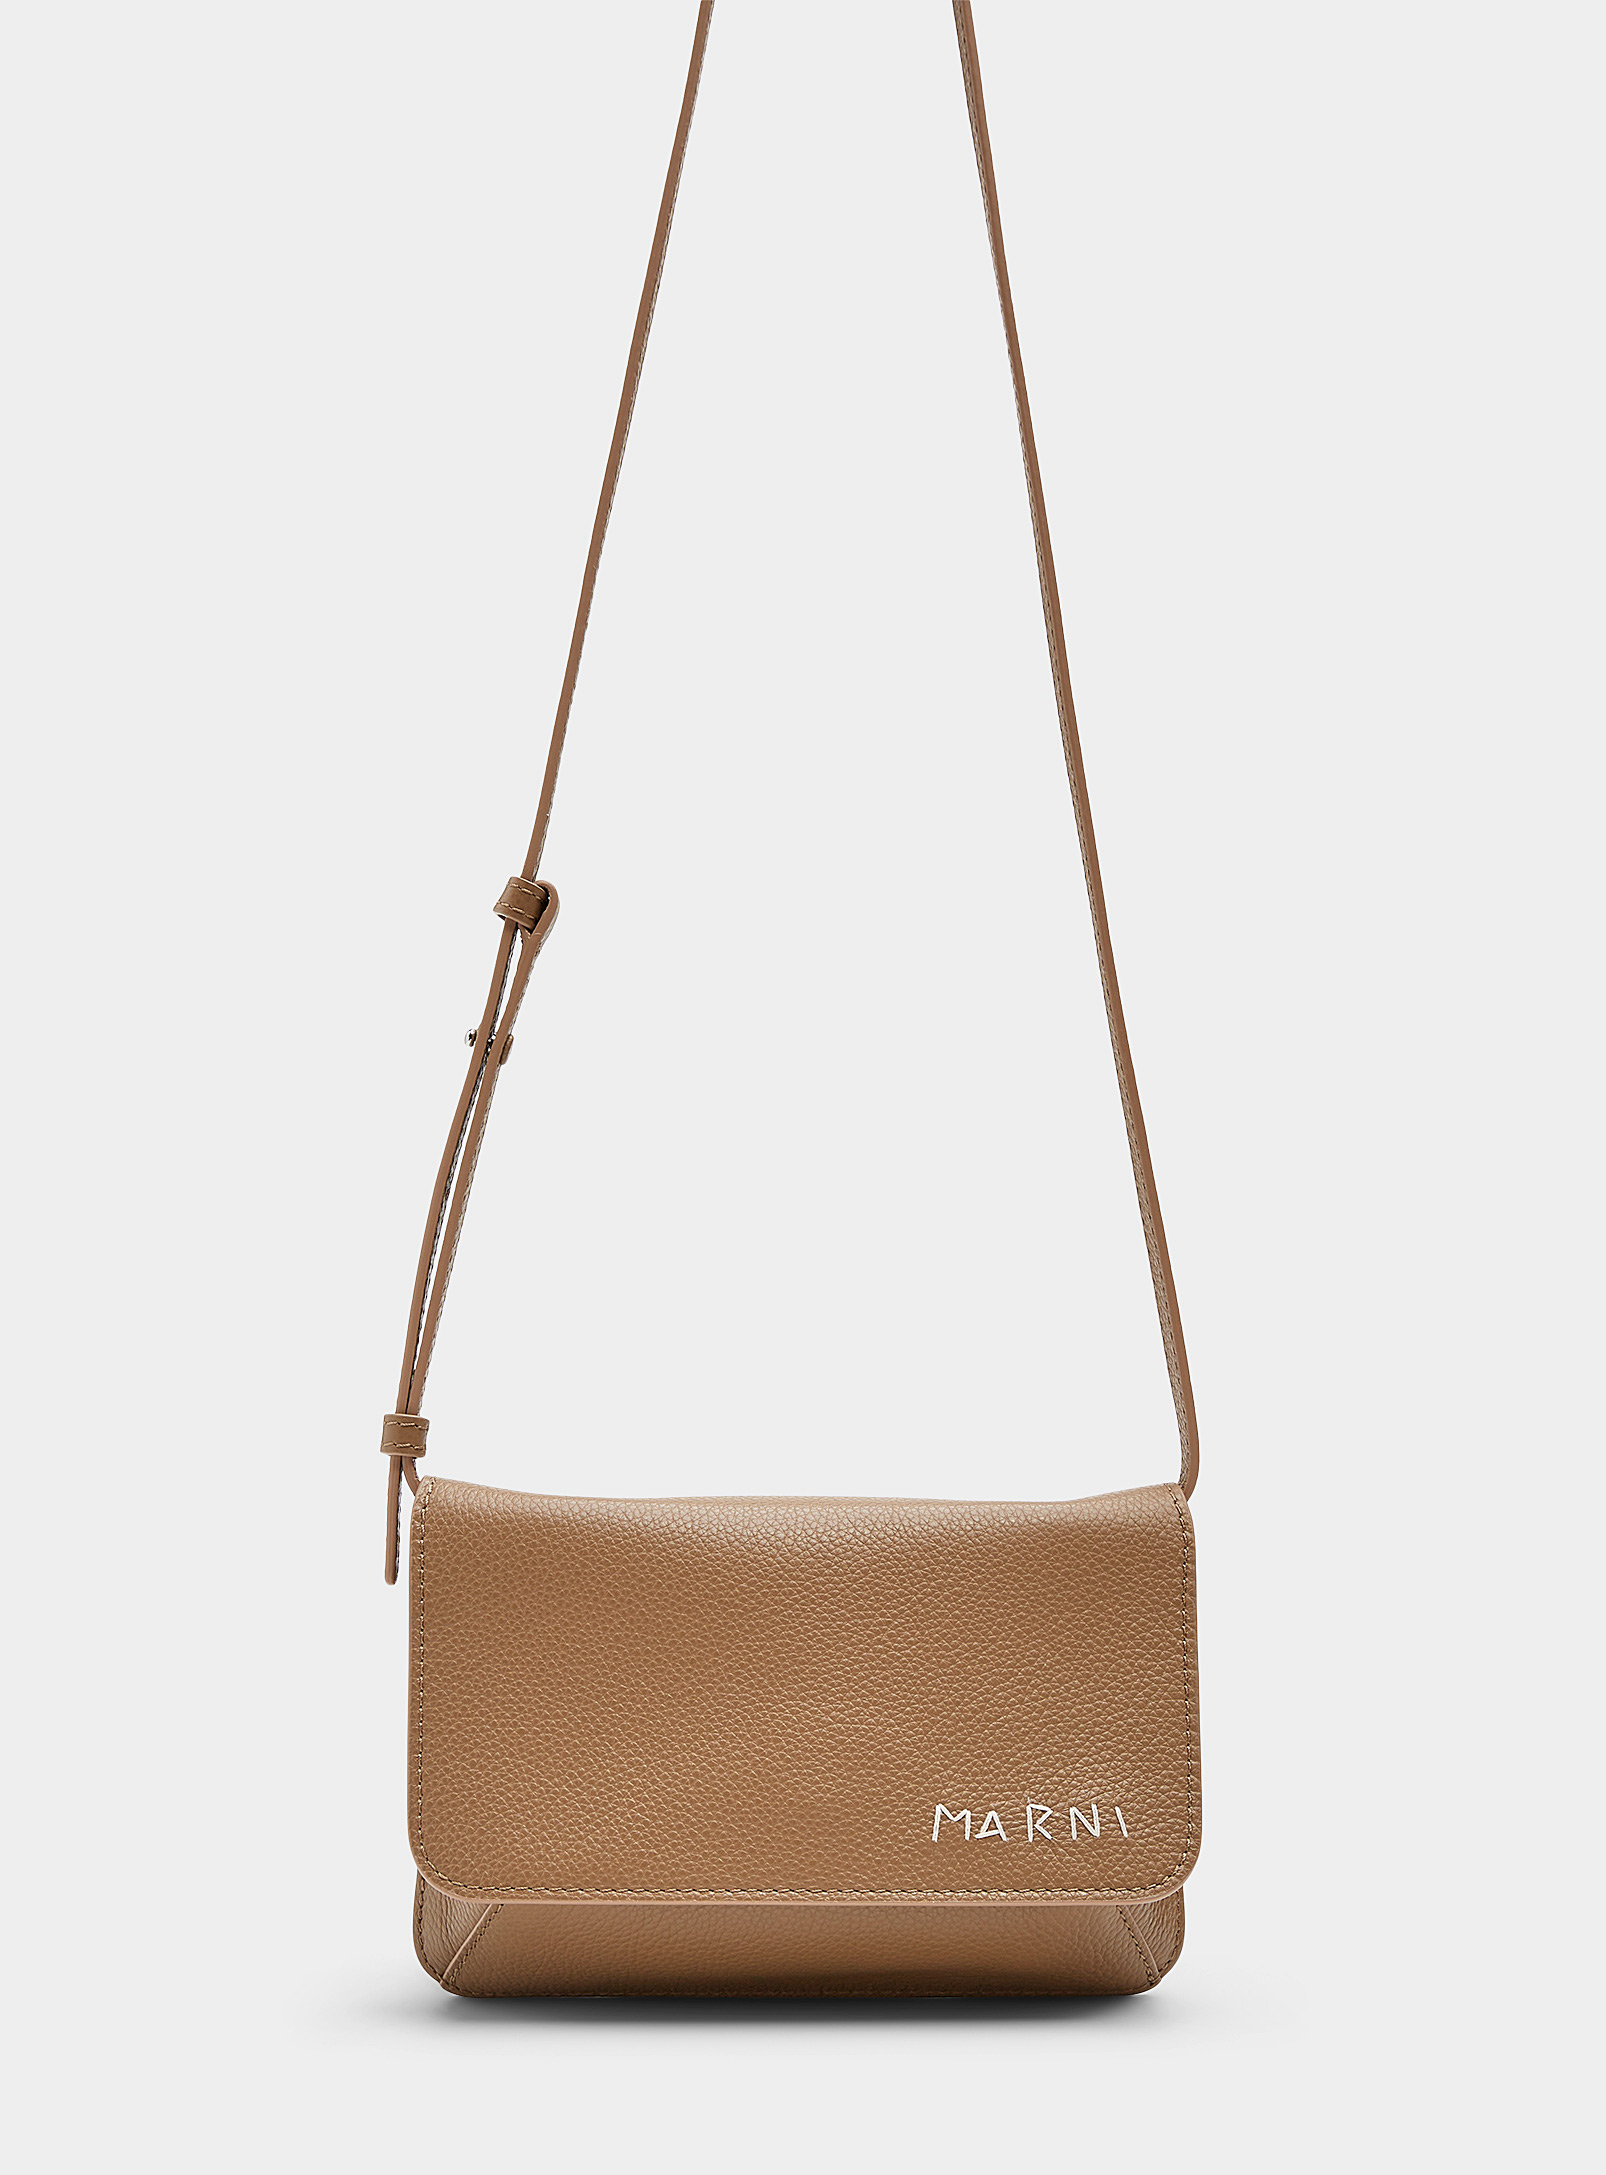 Marni Small Cross-body Bag With Flap In Ivory/cream Beige